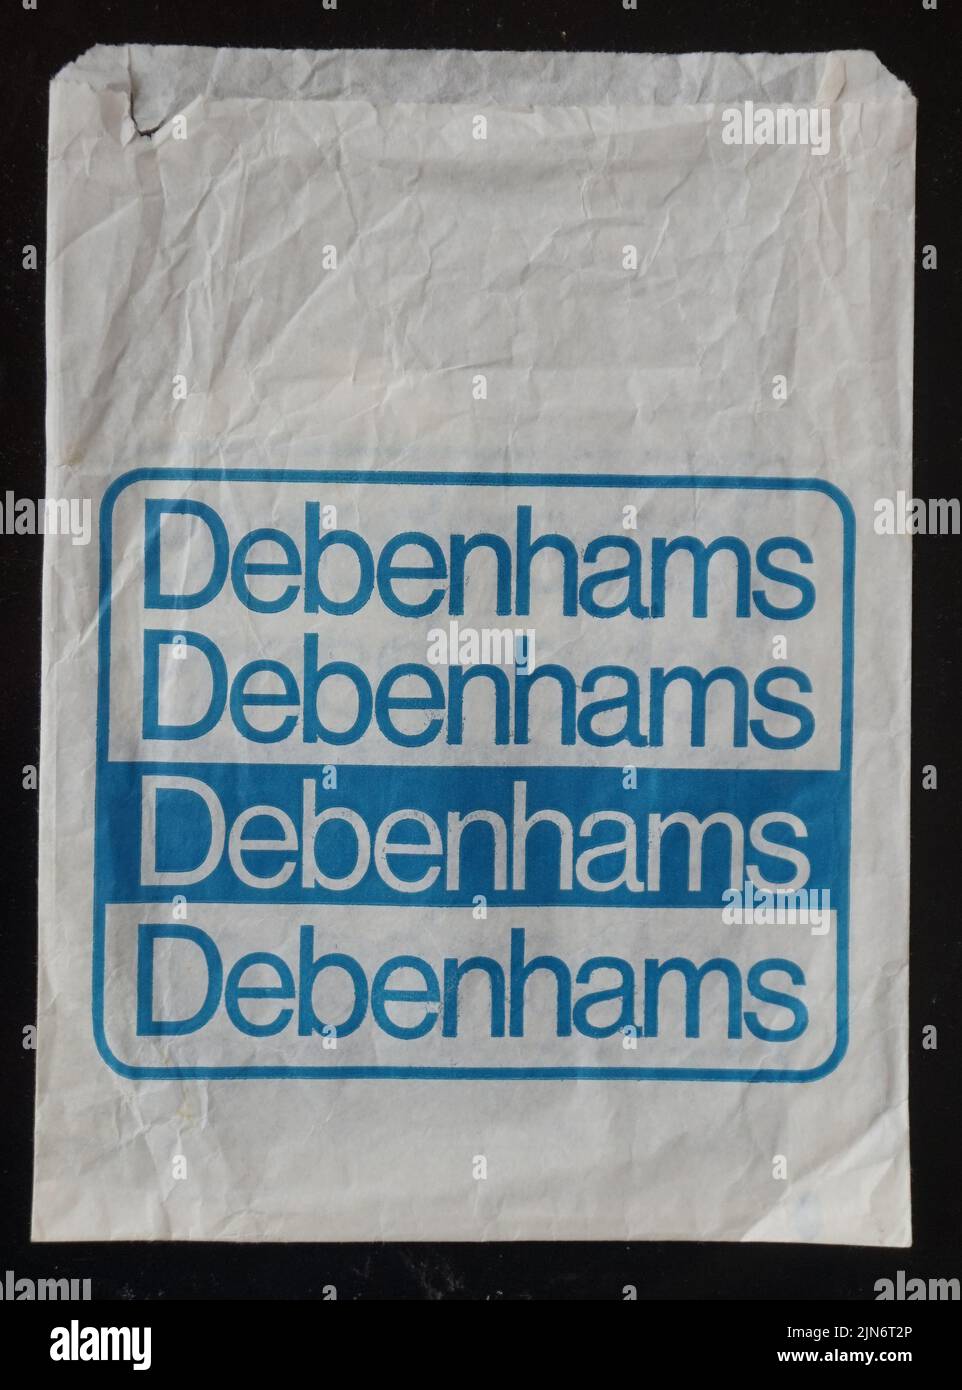 Debenhams paper in store bag, functional piece of graphic packaging design. This famous British chain of department stores has closed in recent years (2021), a victim of private equity asset stripping and high street shopping changes. Paper ephemera. Stock Photo